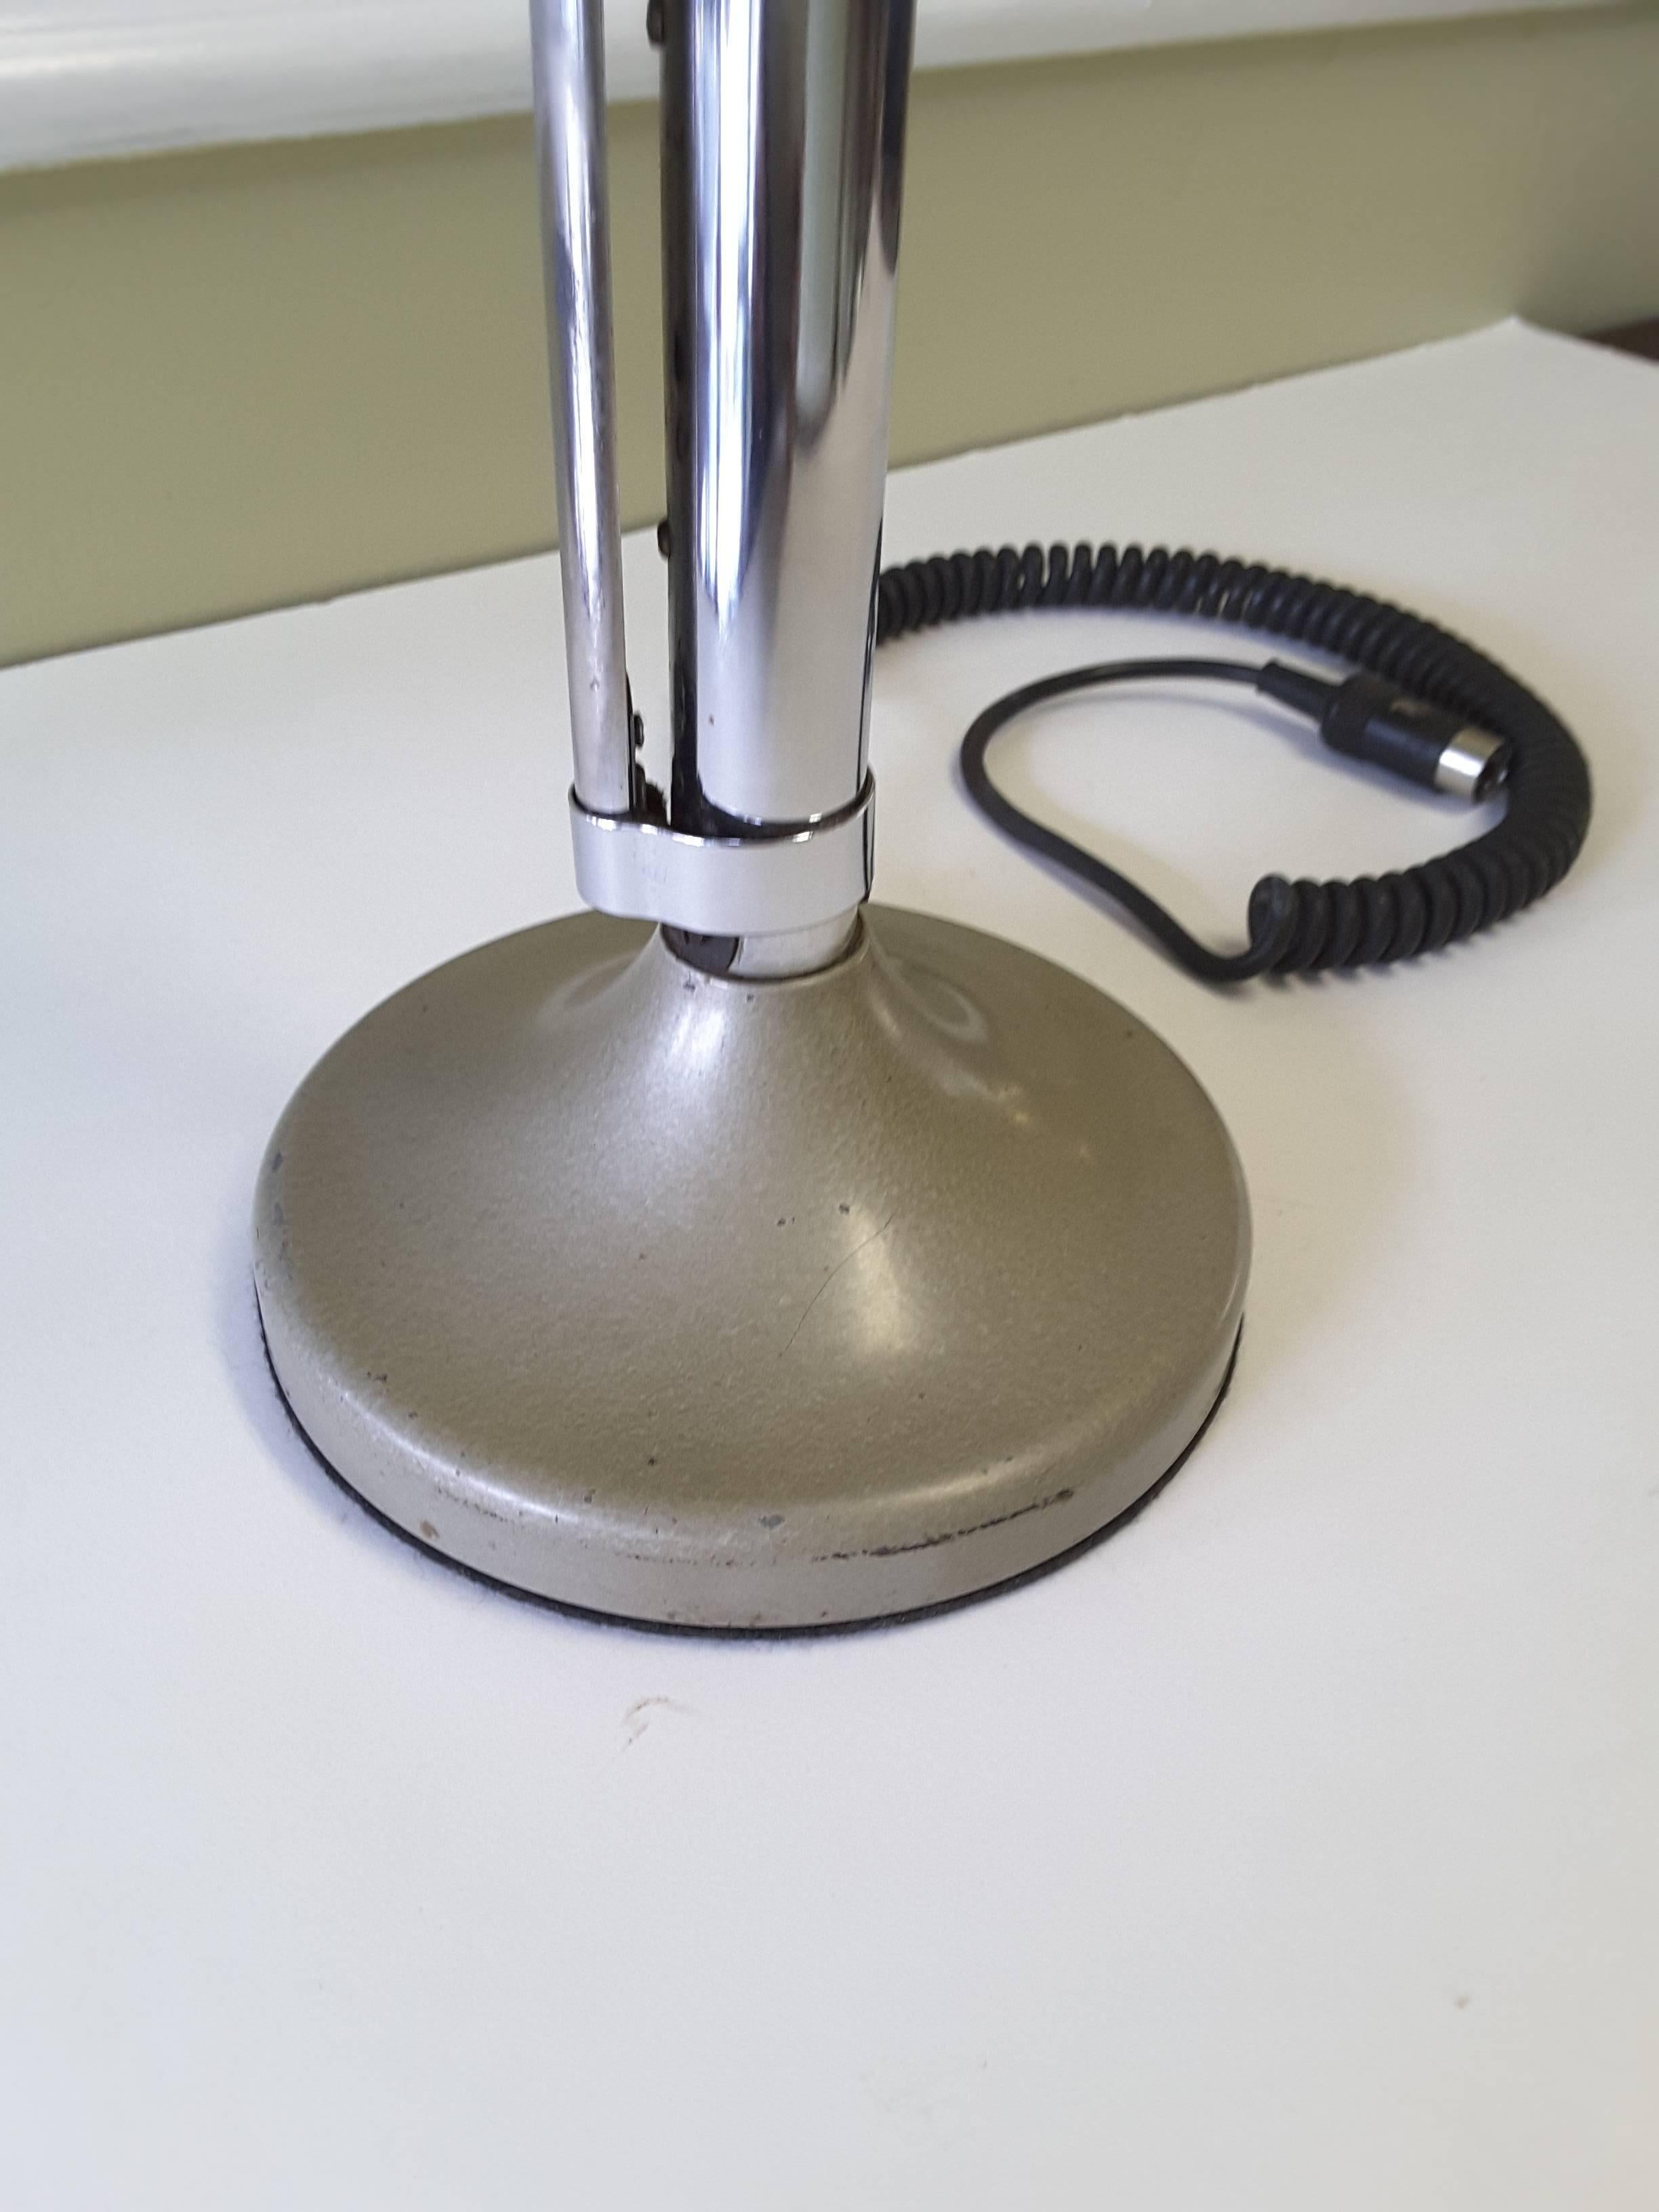 Mid-Century Modern chrome tabletop microphone by Astatic Ltd. Made in Toronto, Canada. Round mouth piece with a screen cover and a push bar side talk switch, the mic has a five-pin plug on a black coiled wire. The microphone measures 12"-inches